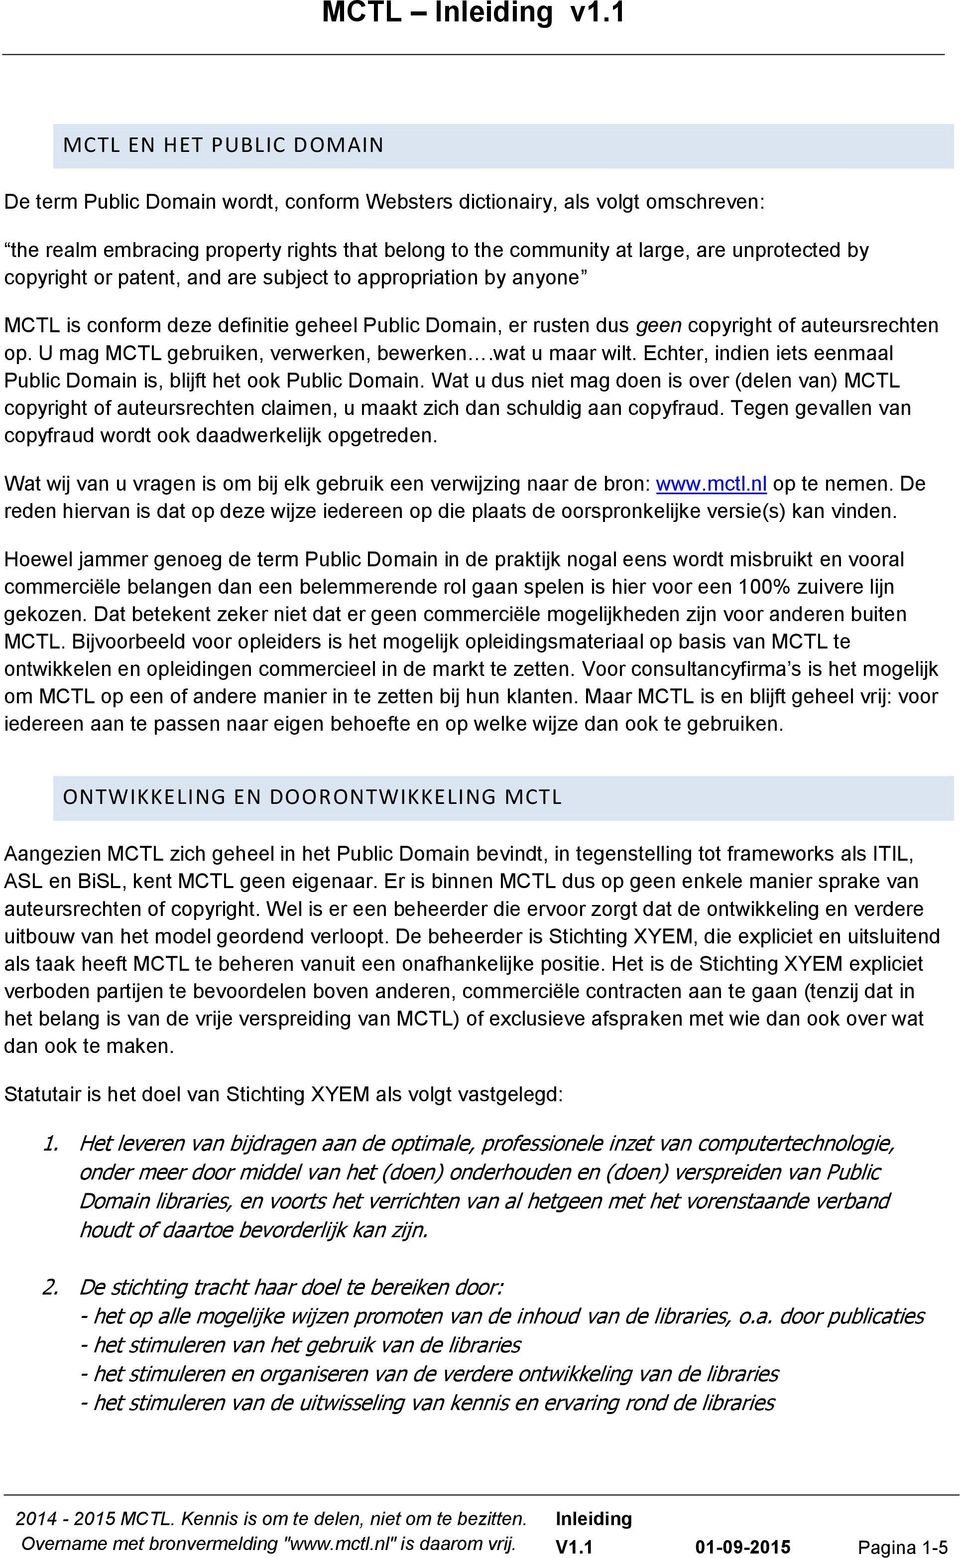 by copyright or patent, and are subject to appropriation by anyone MCTL is conform deze definitie geheel Public Domain, er rusten dus geen copyright of auteursrechten op.